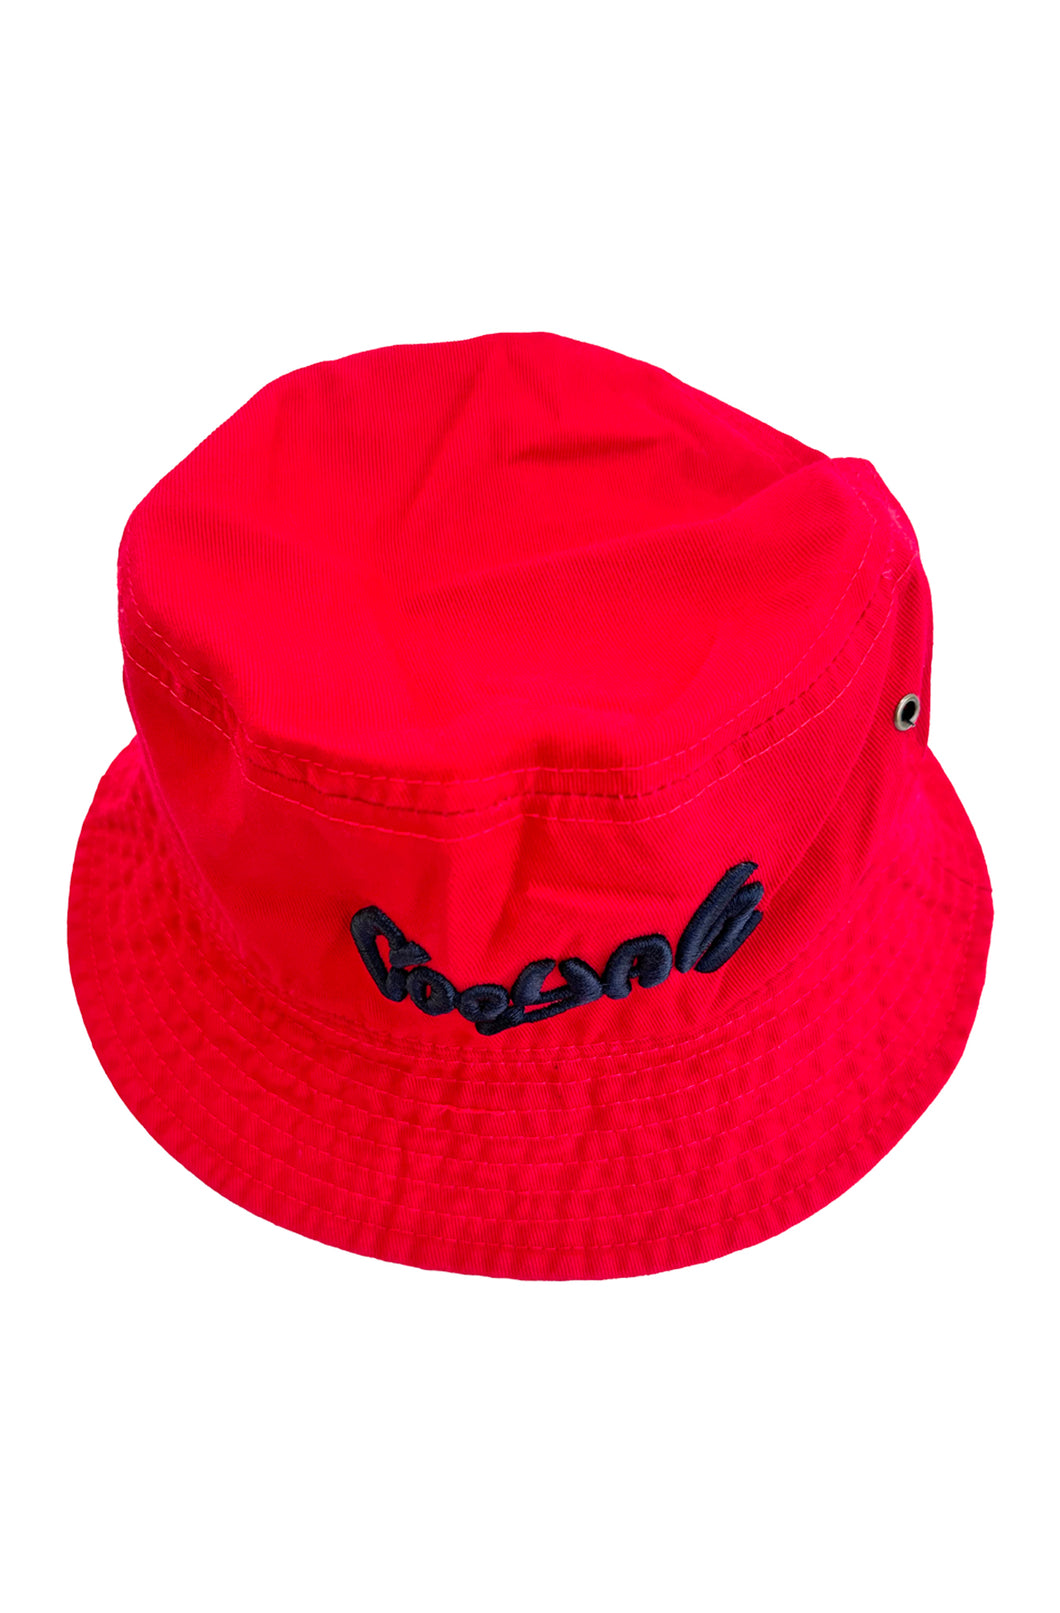 Cooyah lime red bucket hat with embroidered Cooyah logo.  Jamaican streetwear, beachwear clothing.